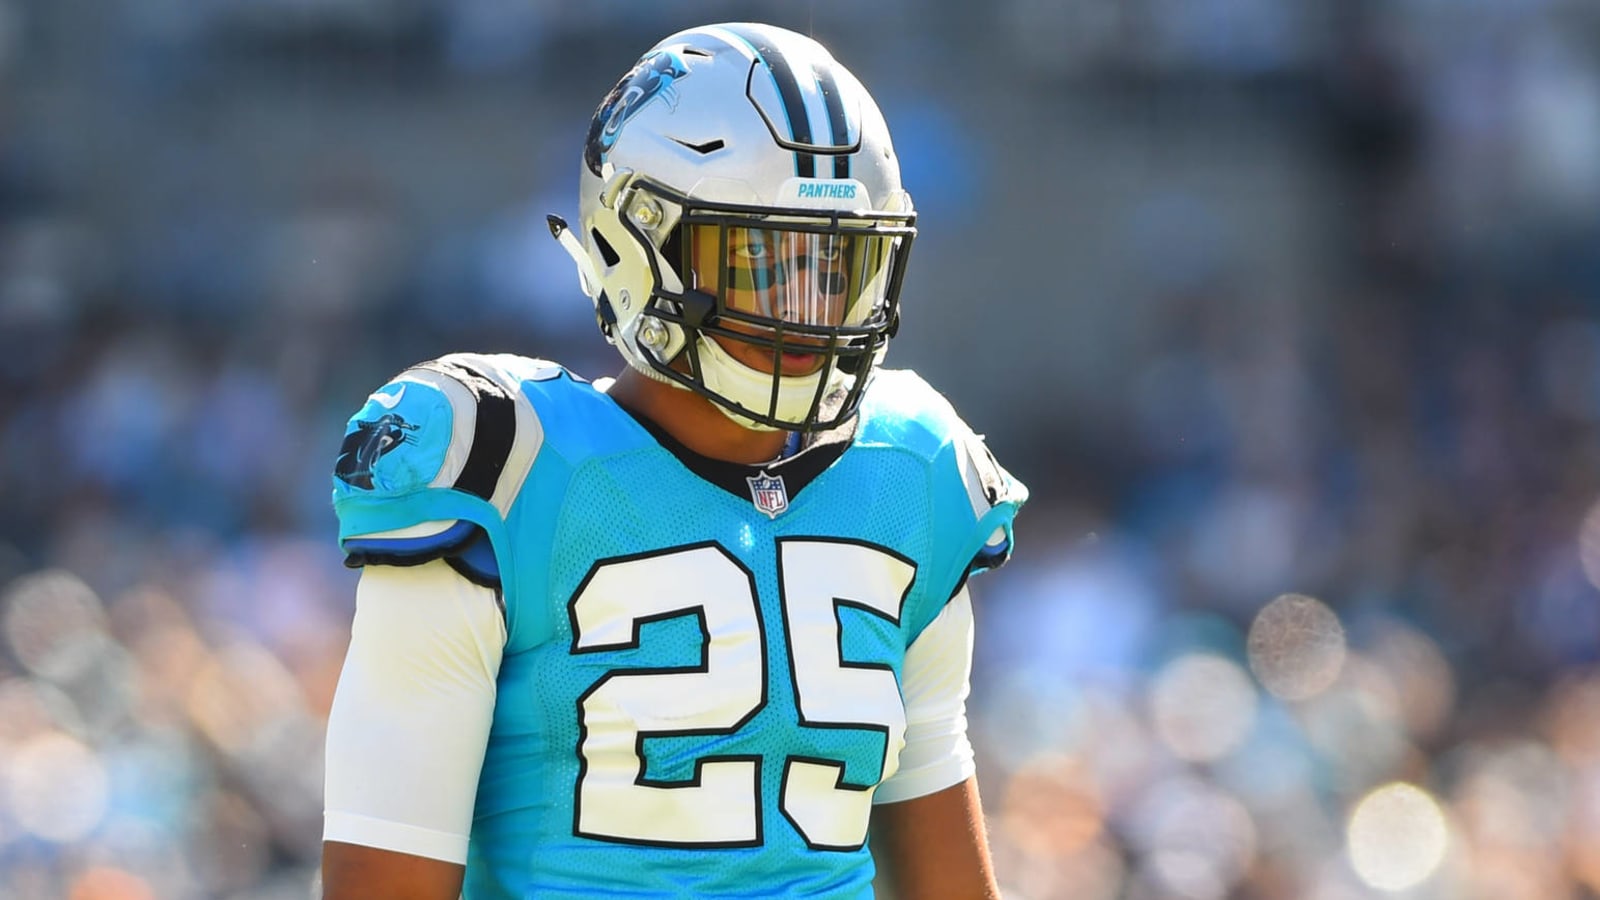 Eric Reid signs three-year extension with Panthers